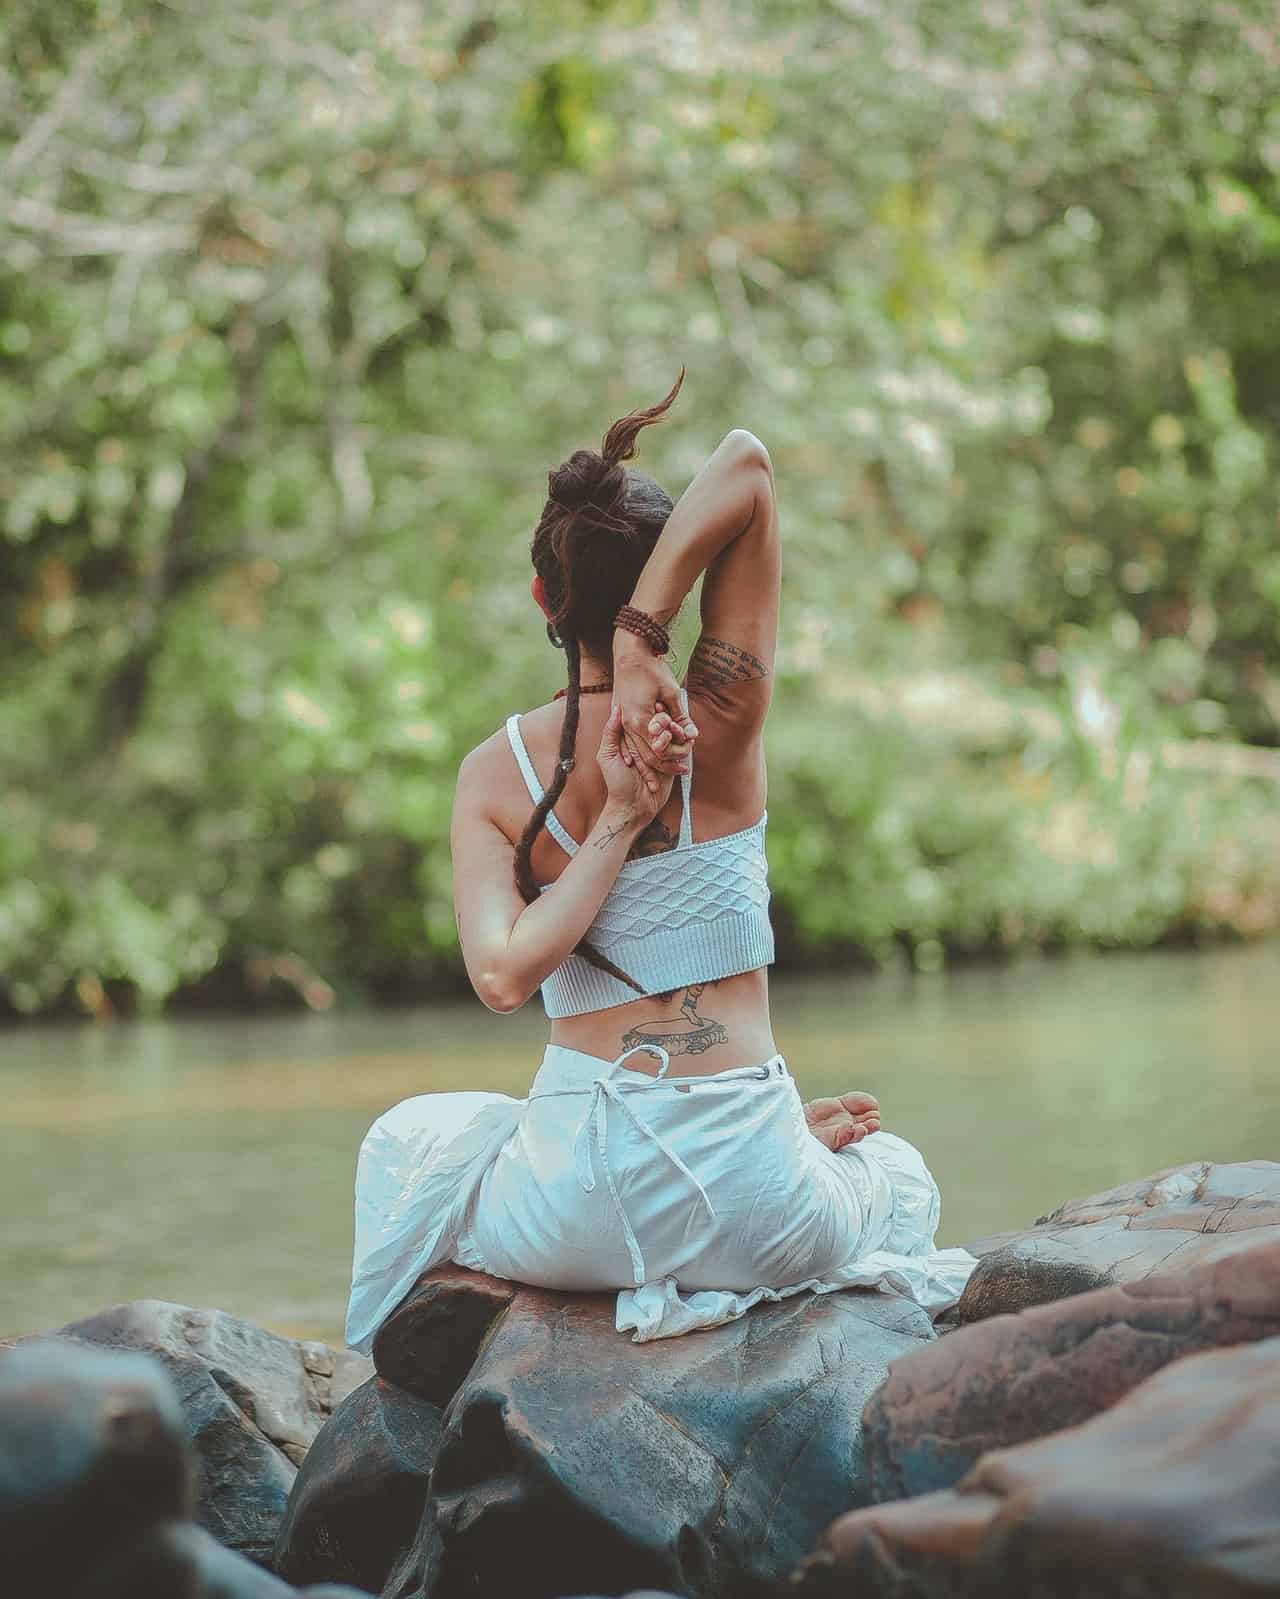 back-view-photo-of-a-woman-sitting-near-body-of-water-doing-yoga